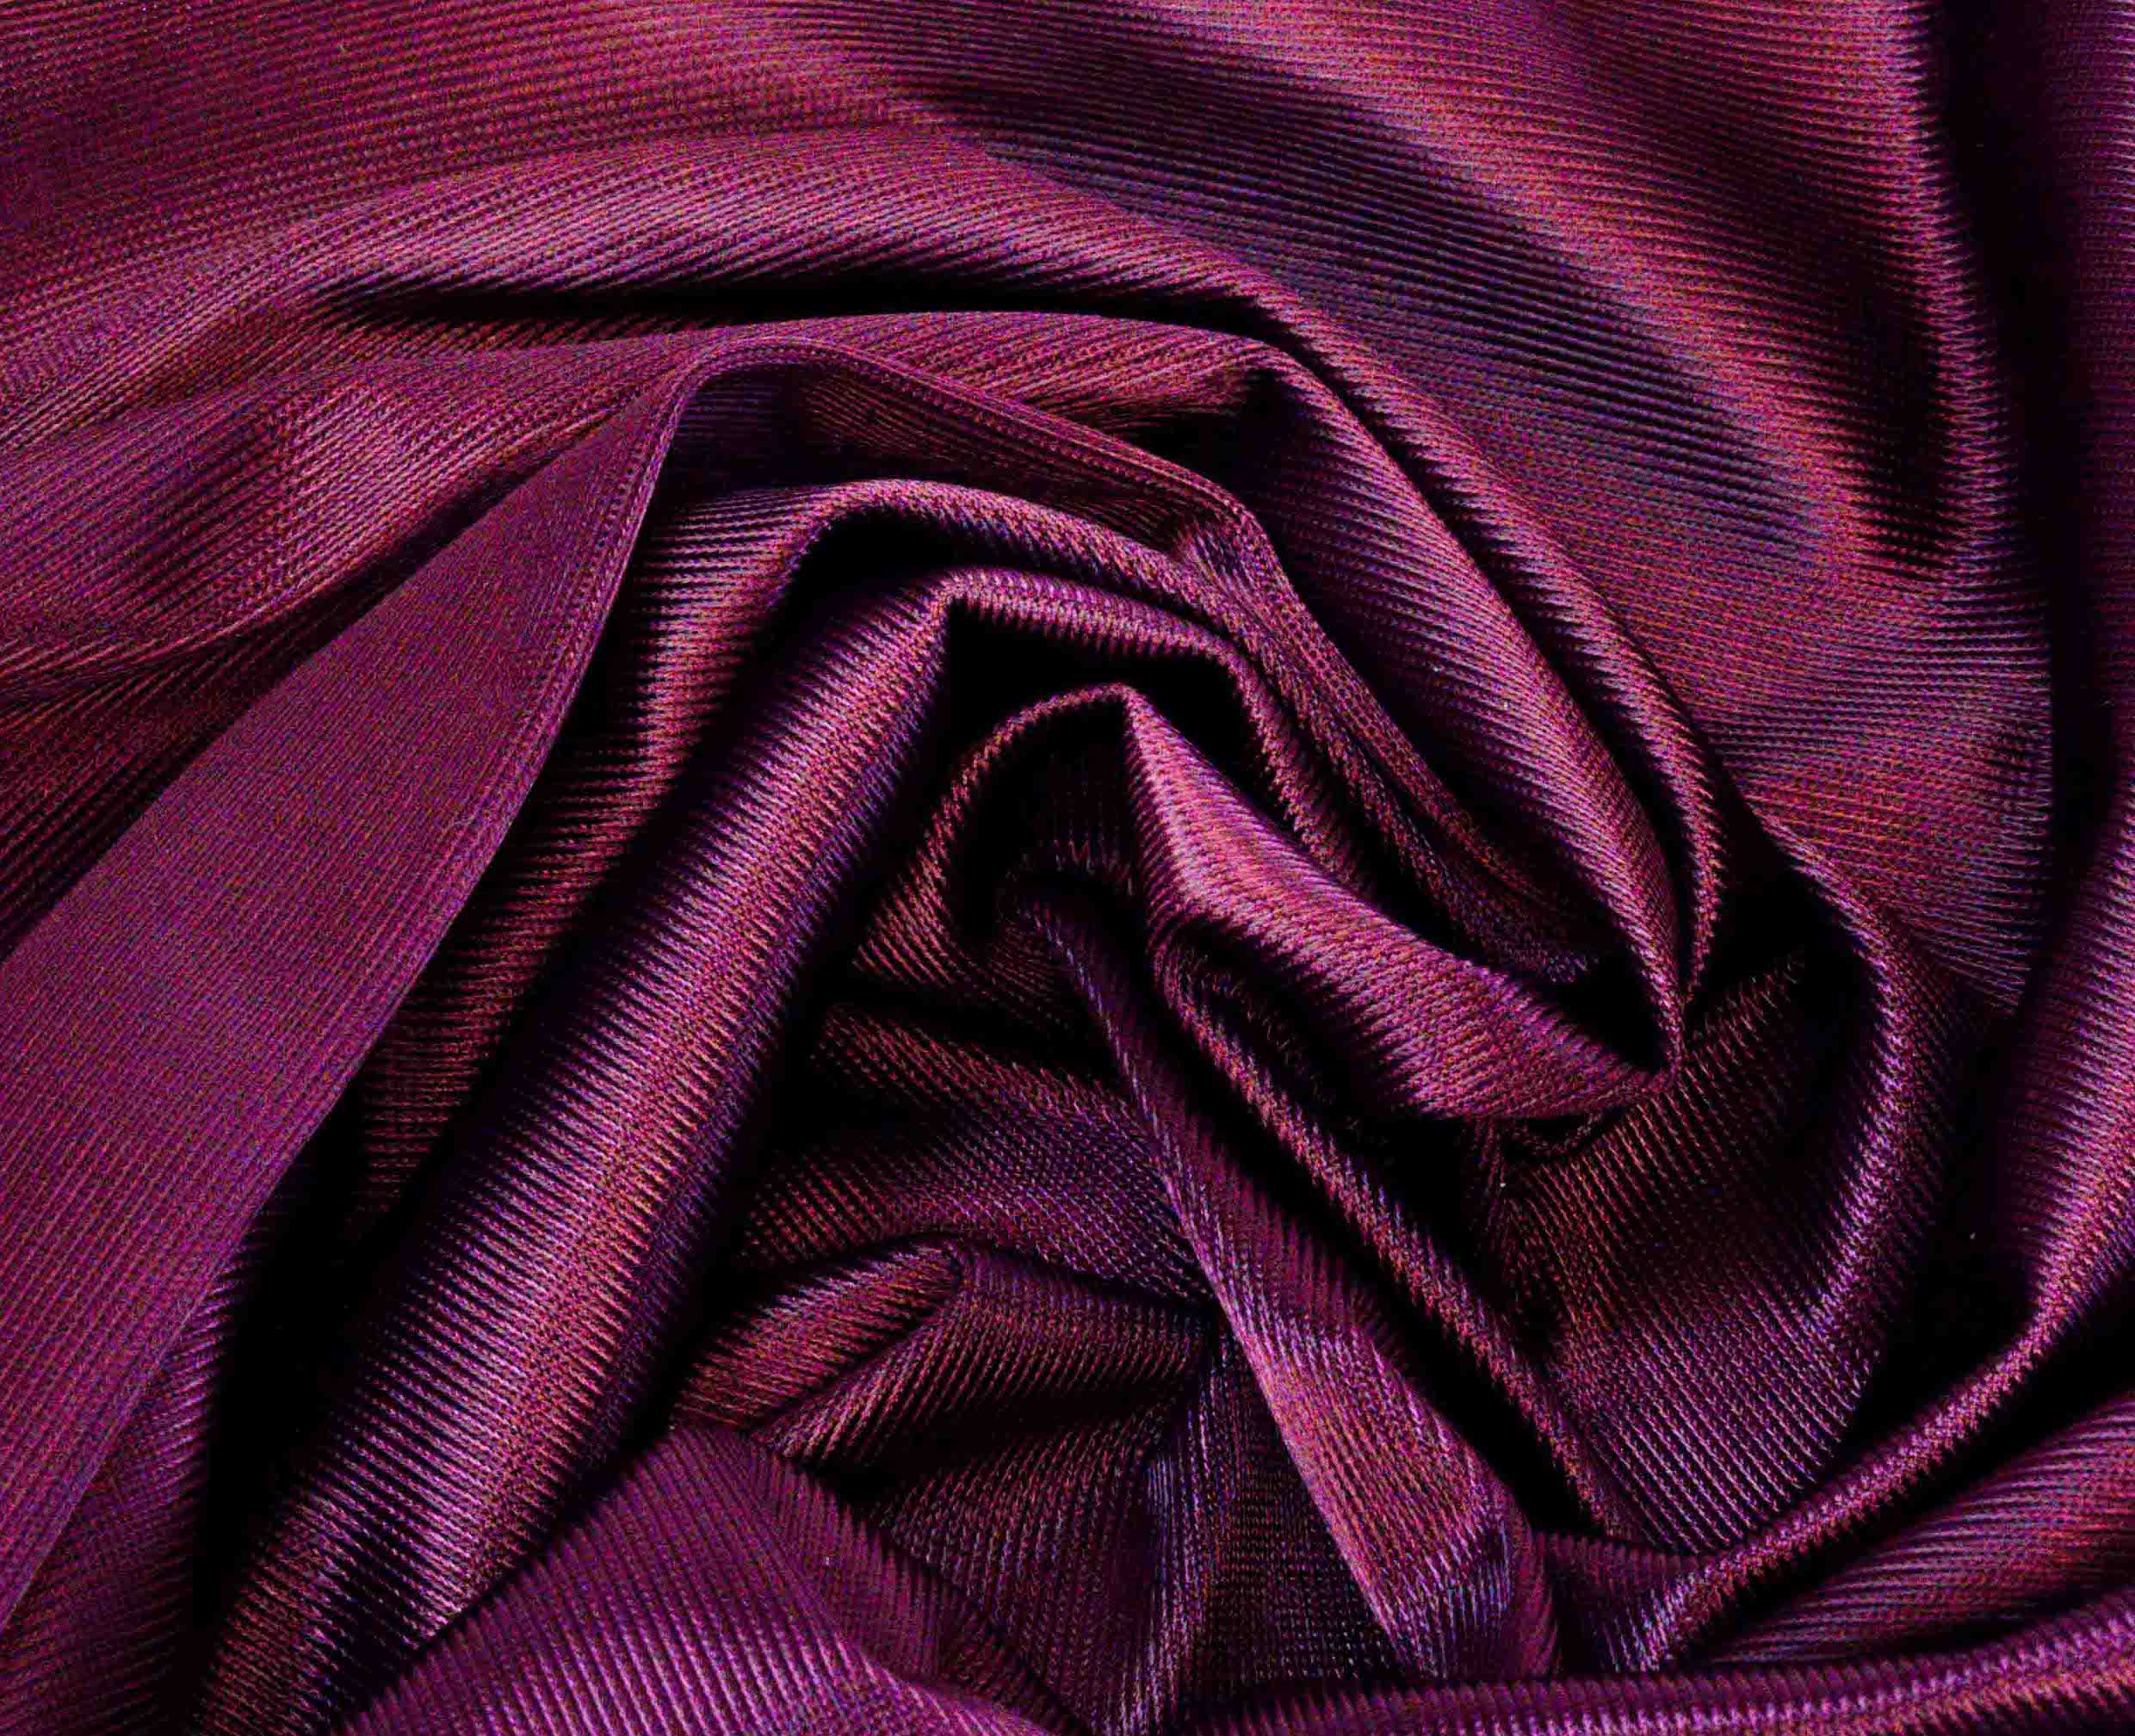 Rubies Custom Bras Black Cherry Red Maroon Soft Satin Bra Fabric that are used in our custom bras. We use only the softest bra materials that won't itch or cause allergies. Our fabrics are long lasting and high quality. Book a online fitting appointment to have a custom bra made today. A custom bra is worth the price because it is custom made to fit and made to last years.